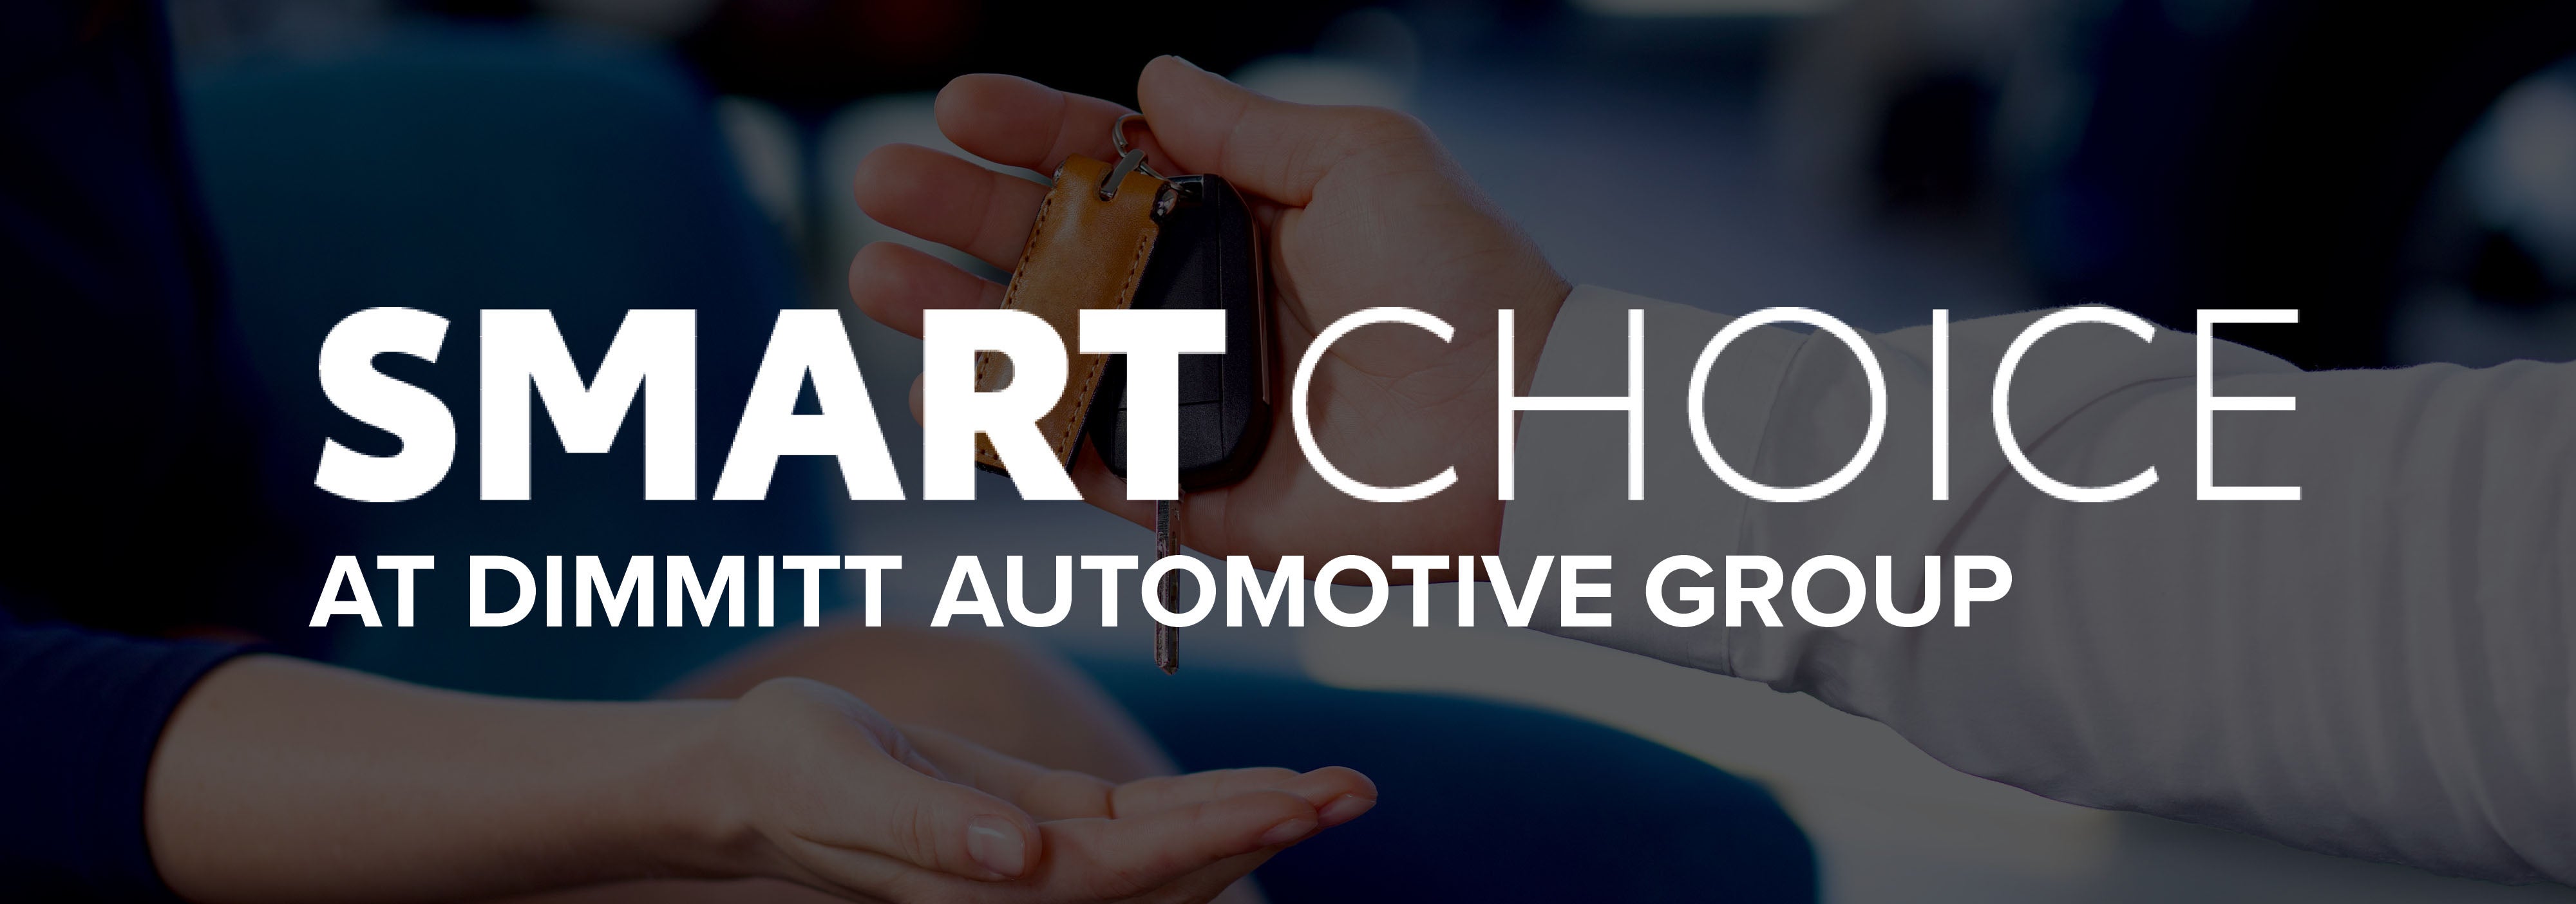 Smart Choice logo with keys getting handed to owner in background